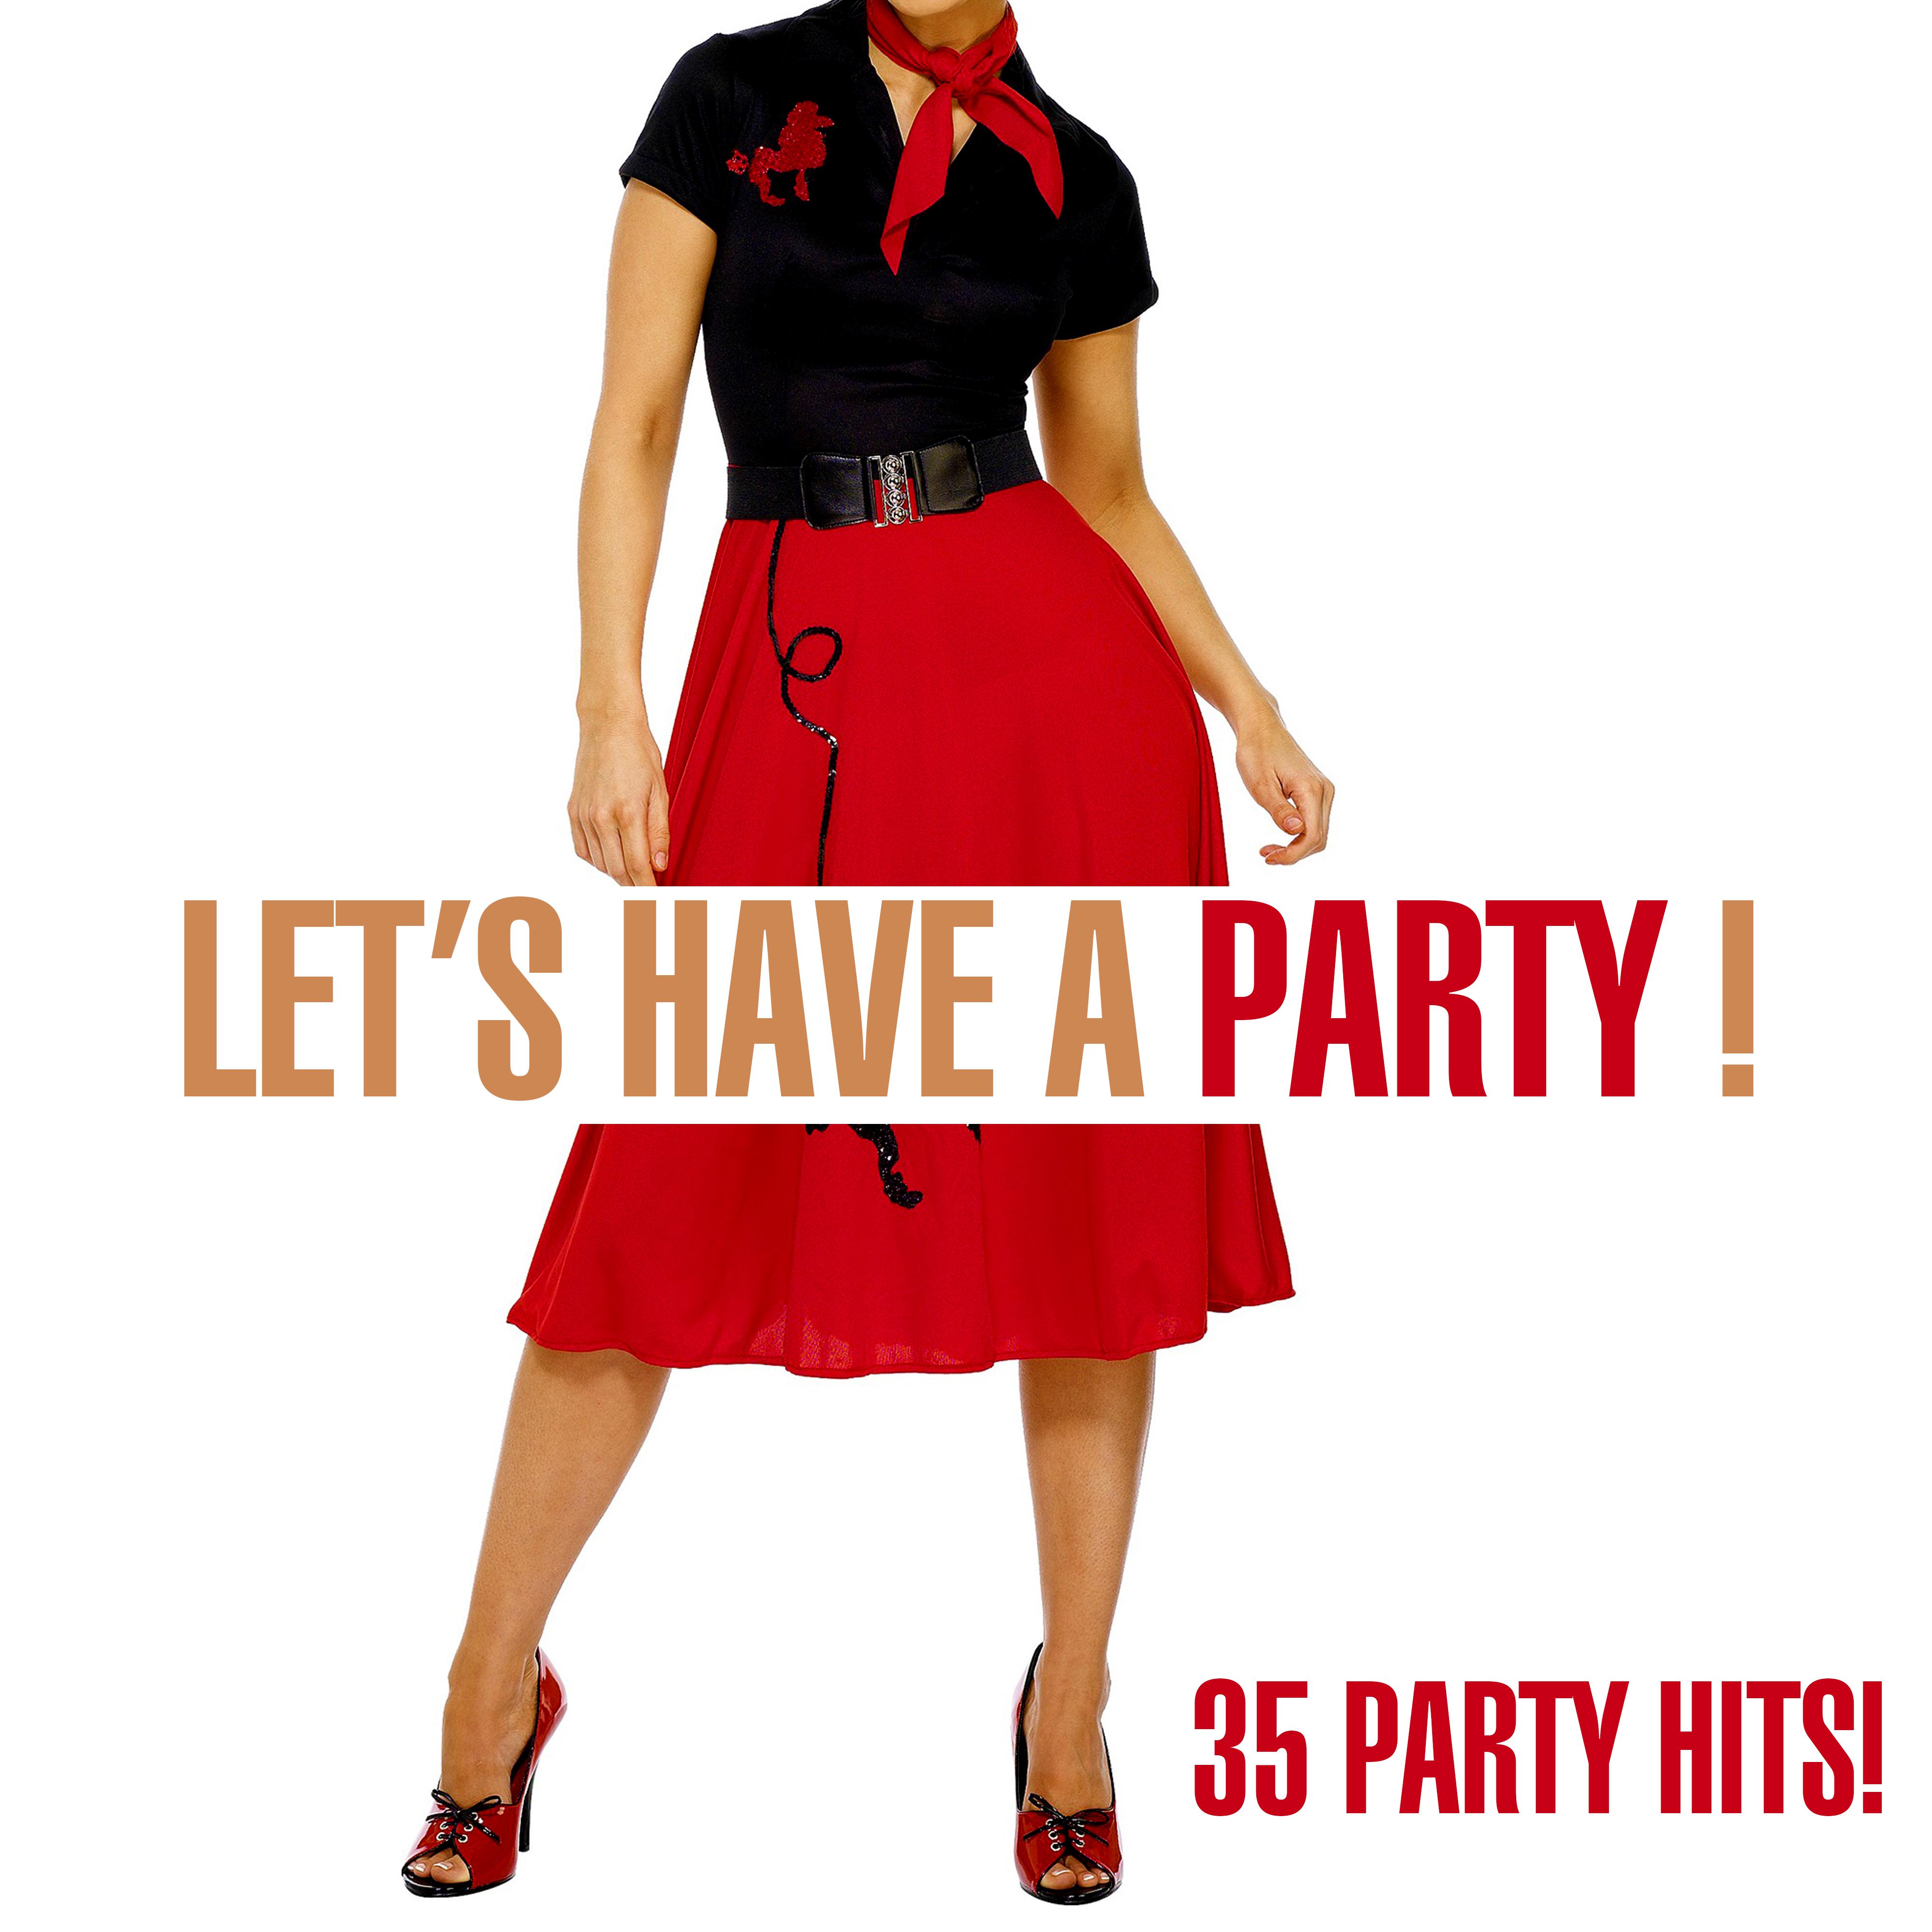 Let's Have A Party! - 35 Party Hits!